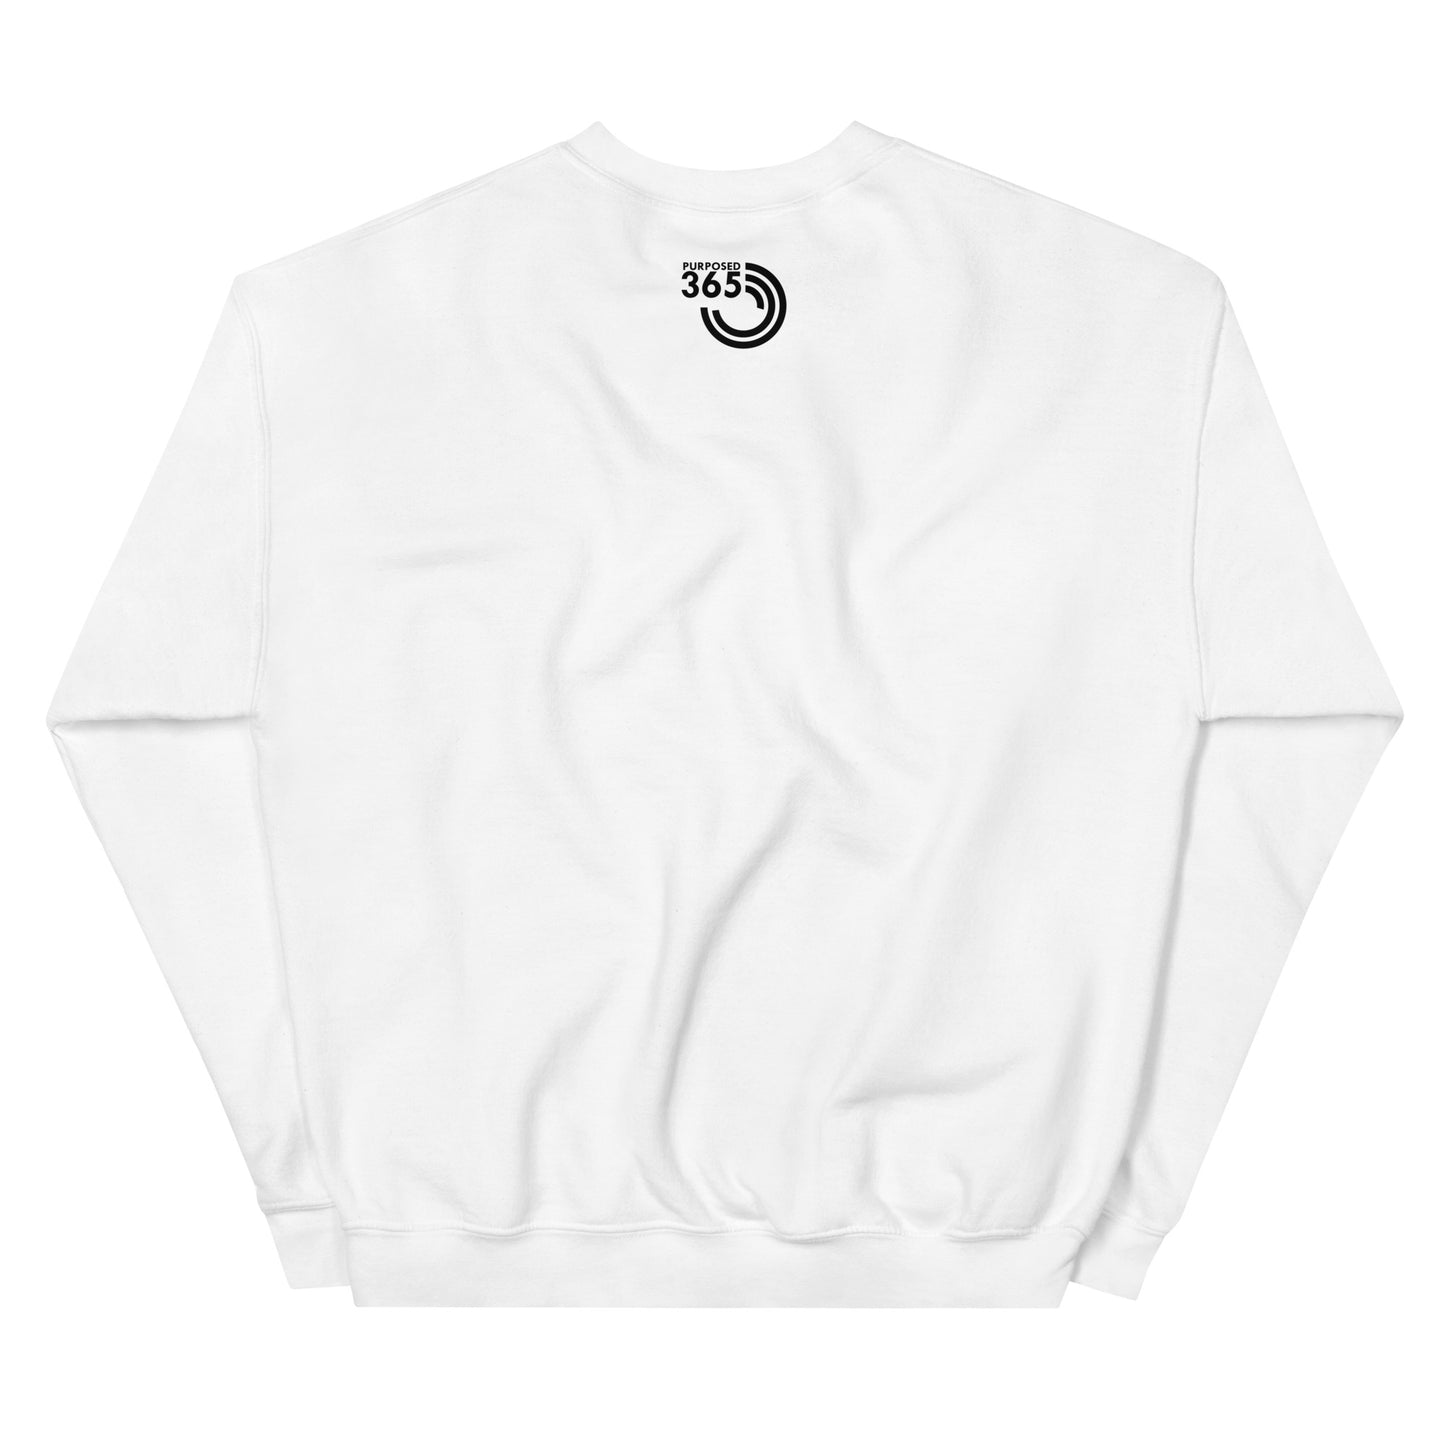 Live with Intentionality White Sweatshirt